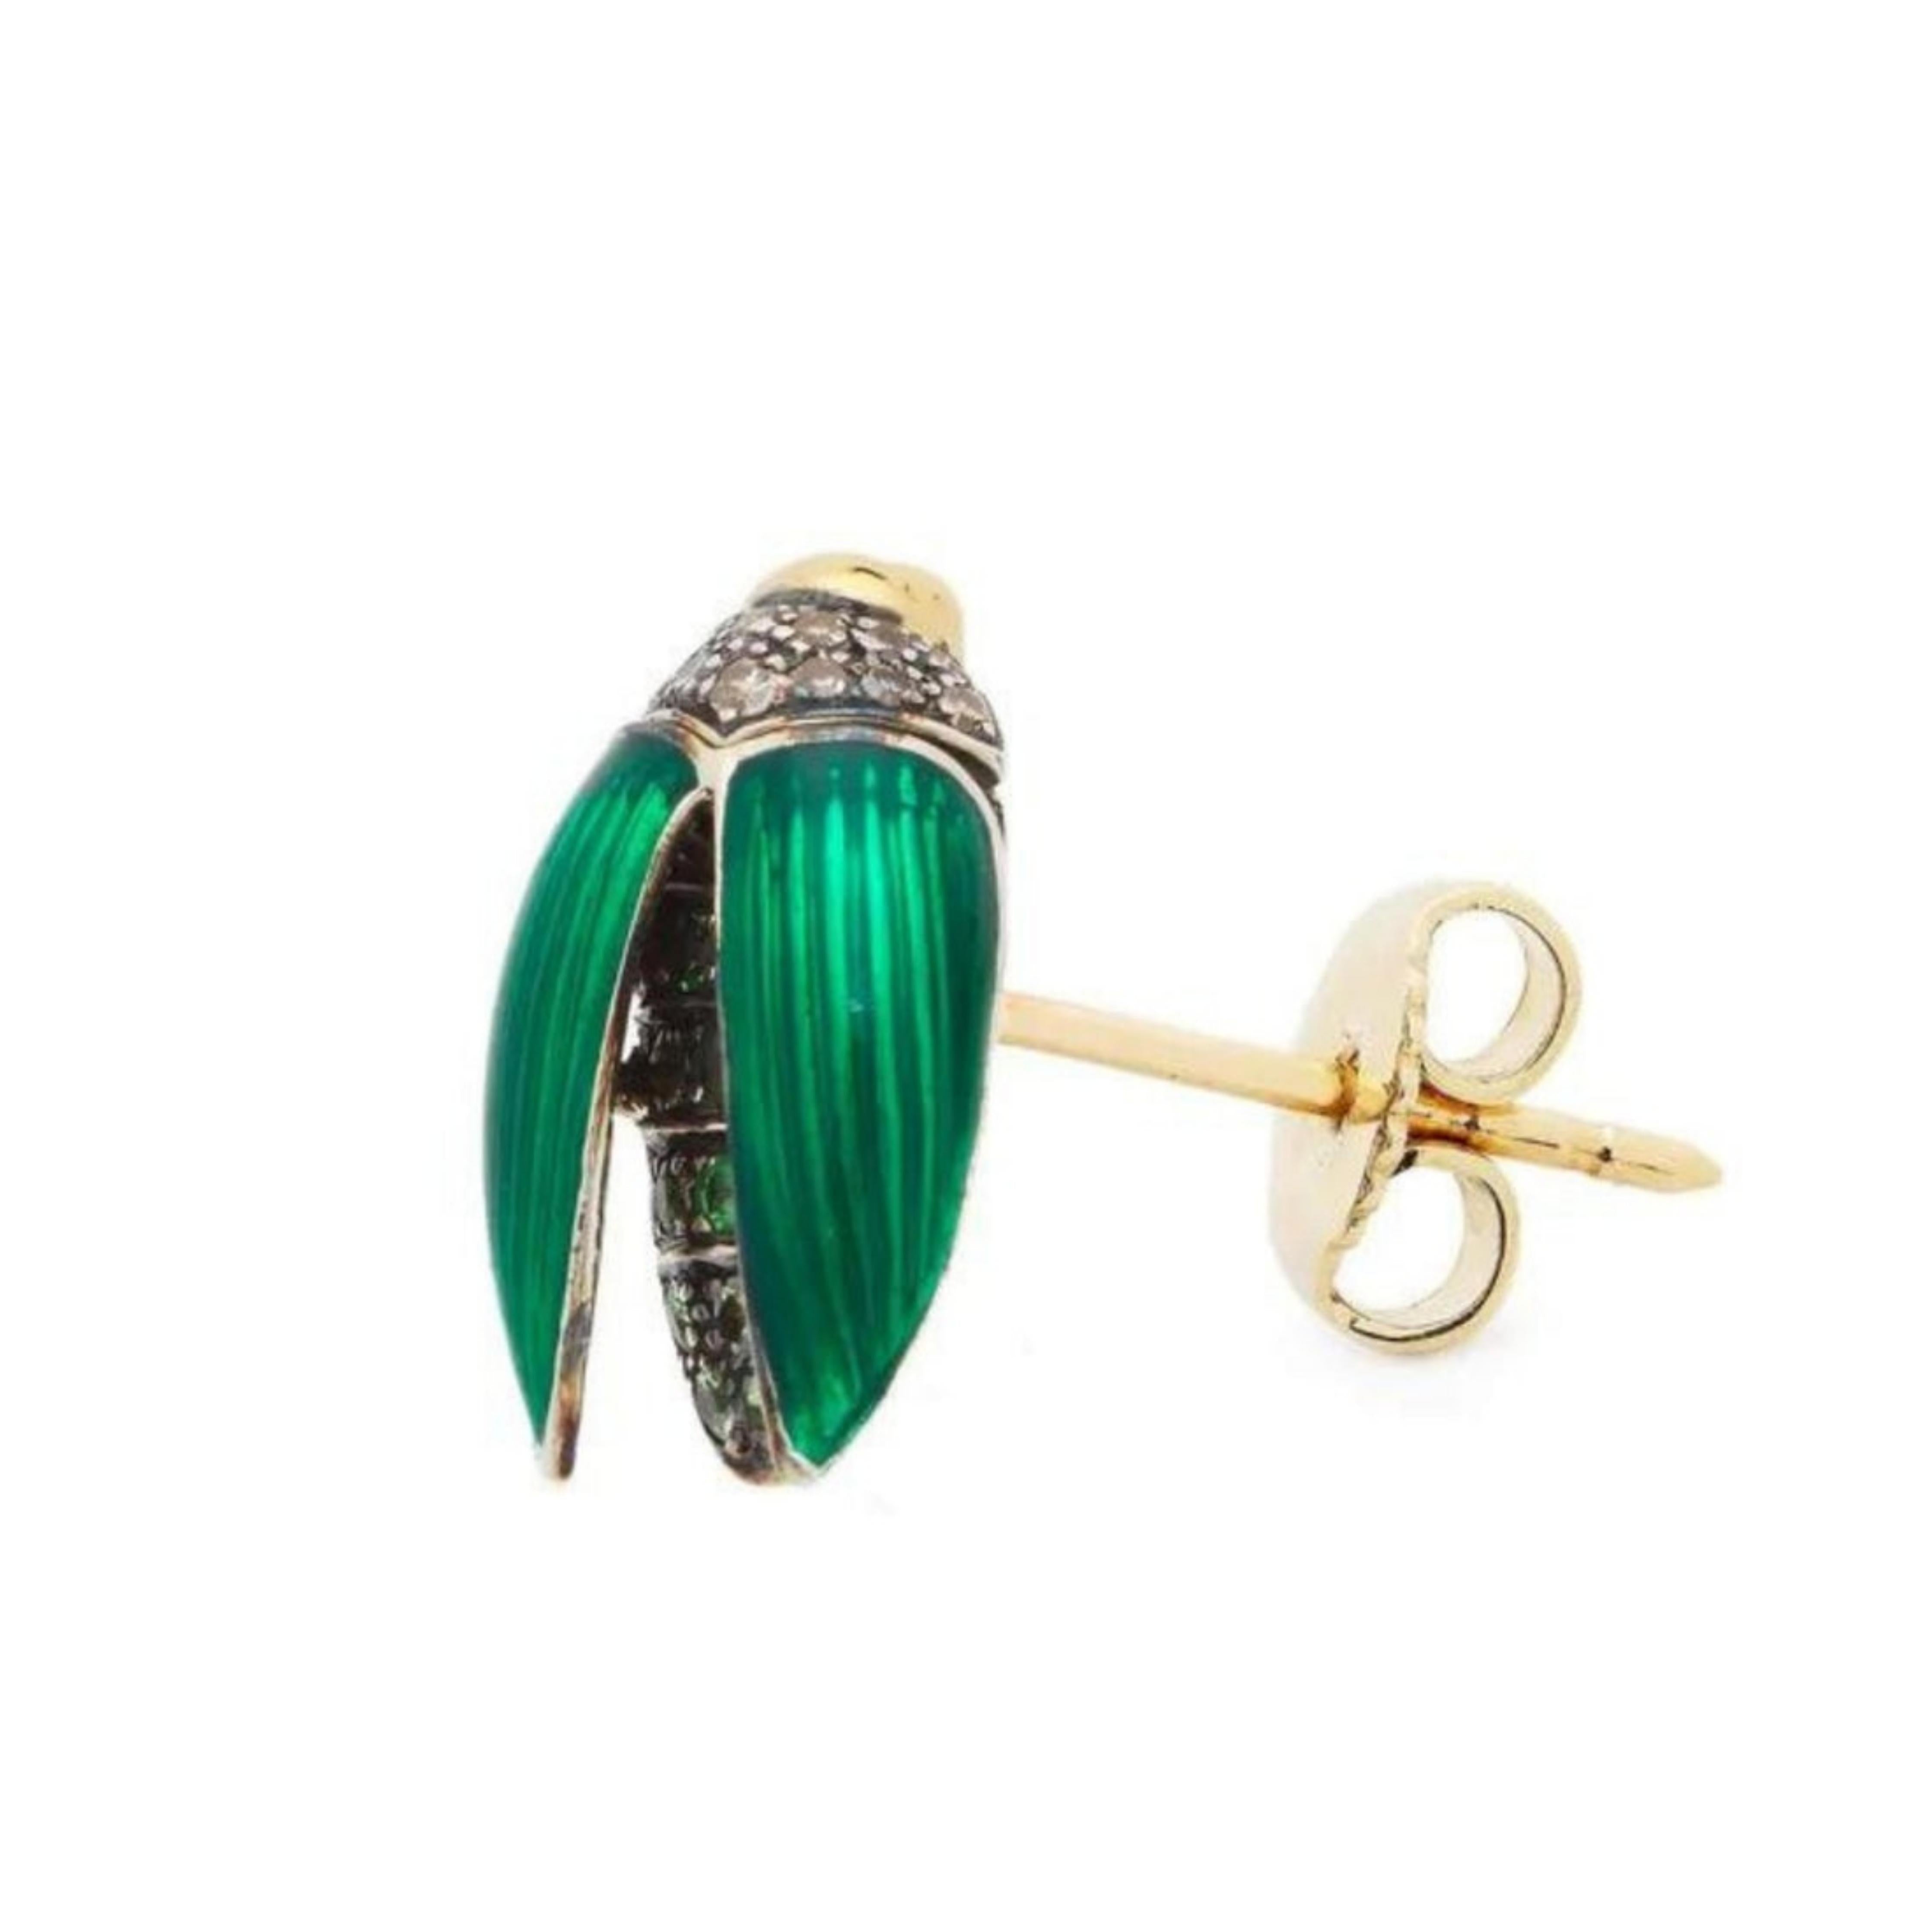 Bibi van der Velden, Mini Scarab Fly Wings Stud Earring. Crafted in 18K yellow gold and sterling silver, the earring features stunning green enamel wings and is decorated with brown diamonds and tsavorites.